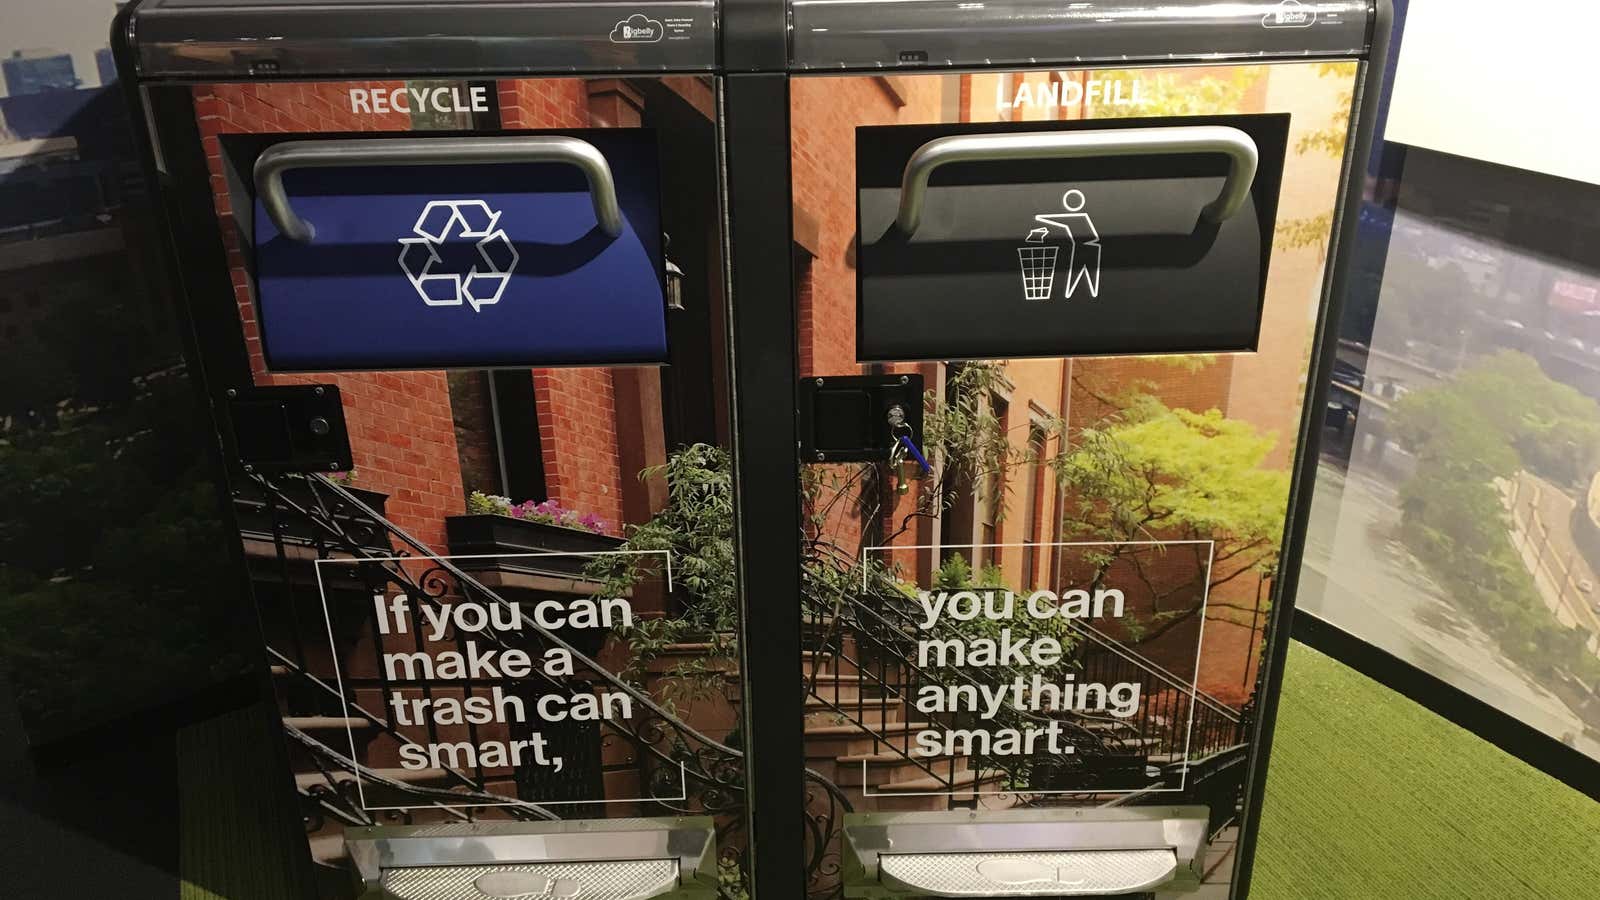 These garbage cans from Big Belly Solar and Verizon are actually solar-powered trash compactors.